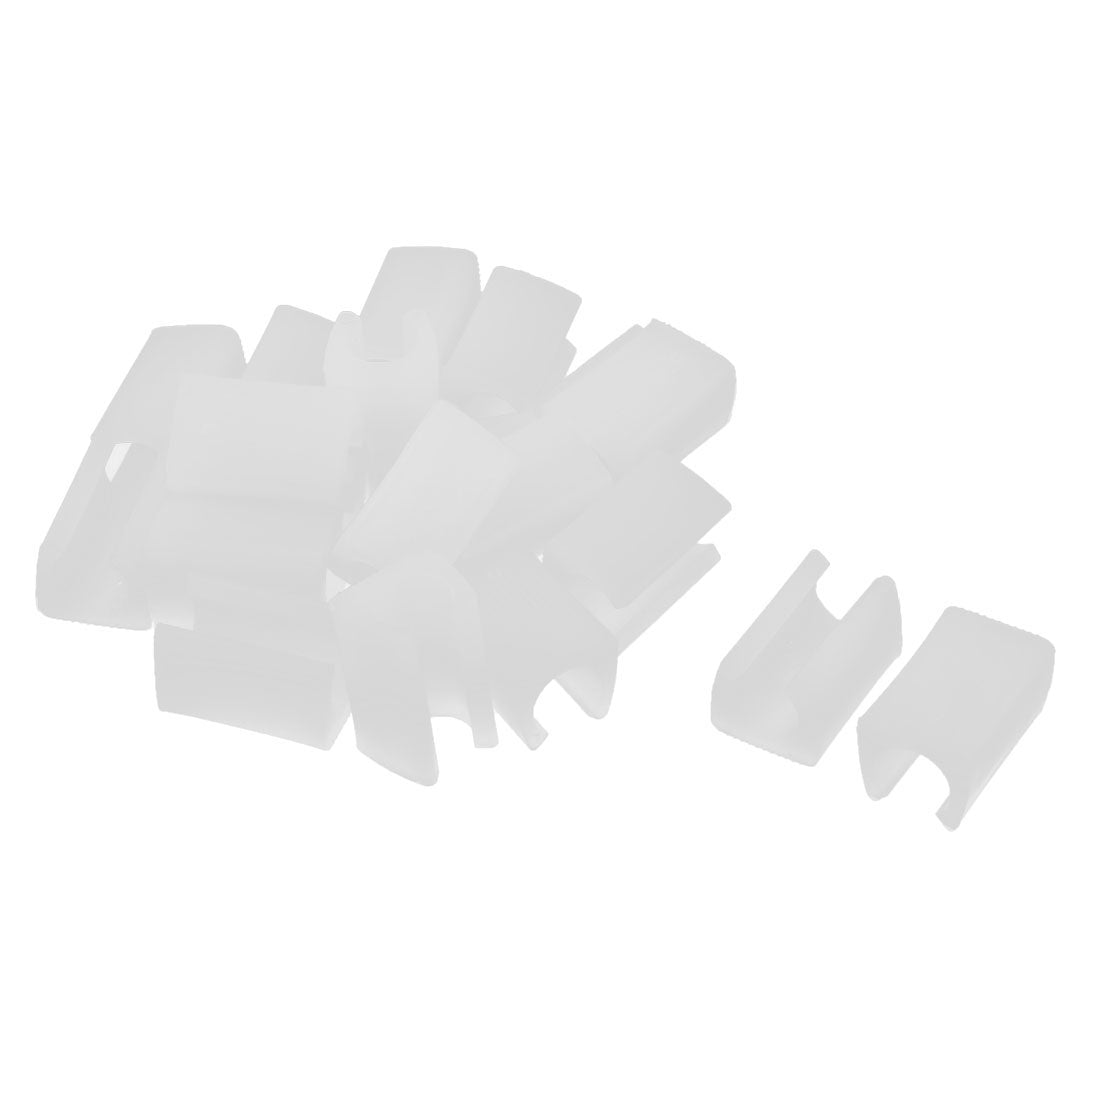 uxcell Uxcell Chair Foot Plastic U Shaped Floor Glides Tubing Caps Cover White 11mm Dia 20pcs